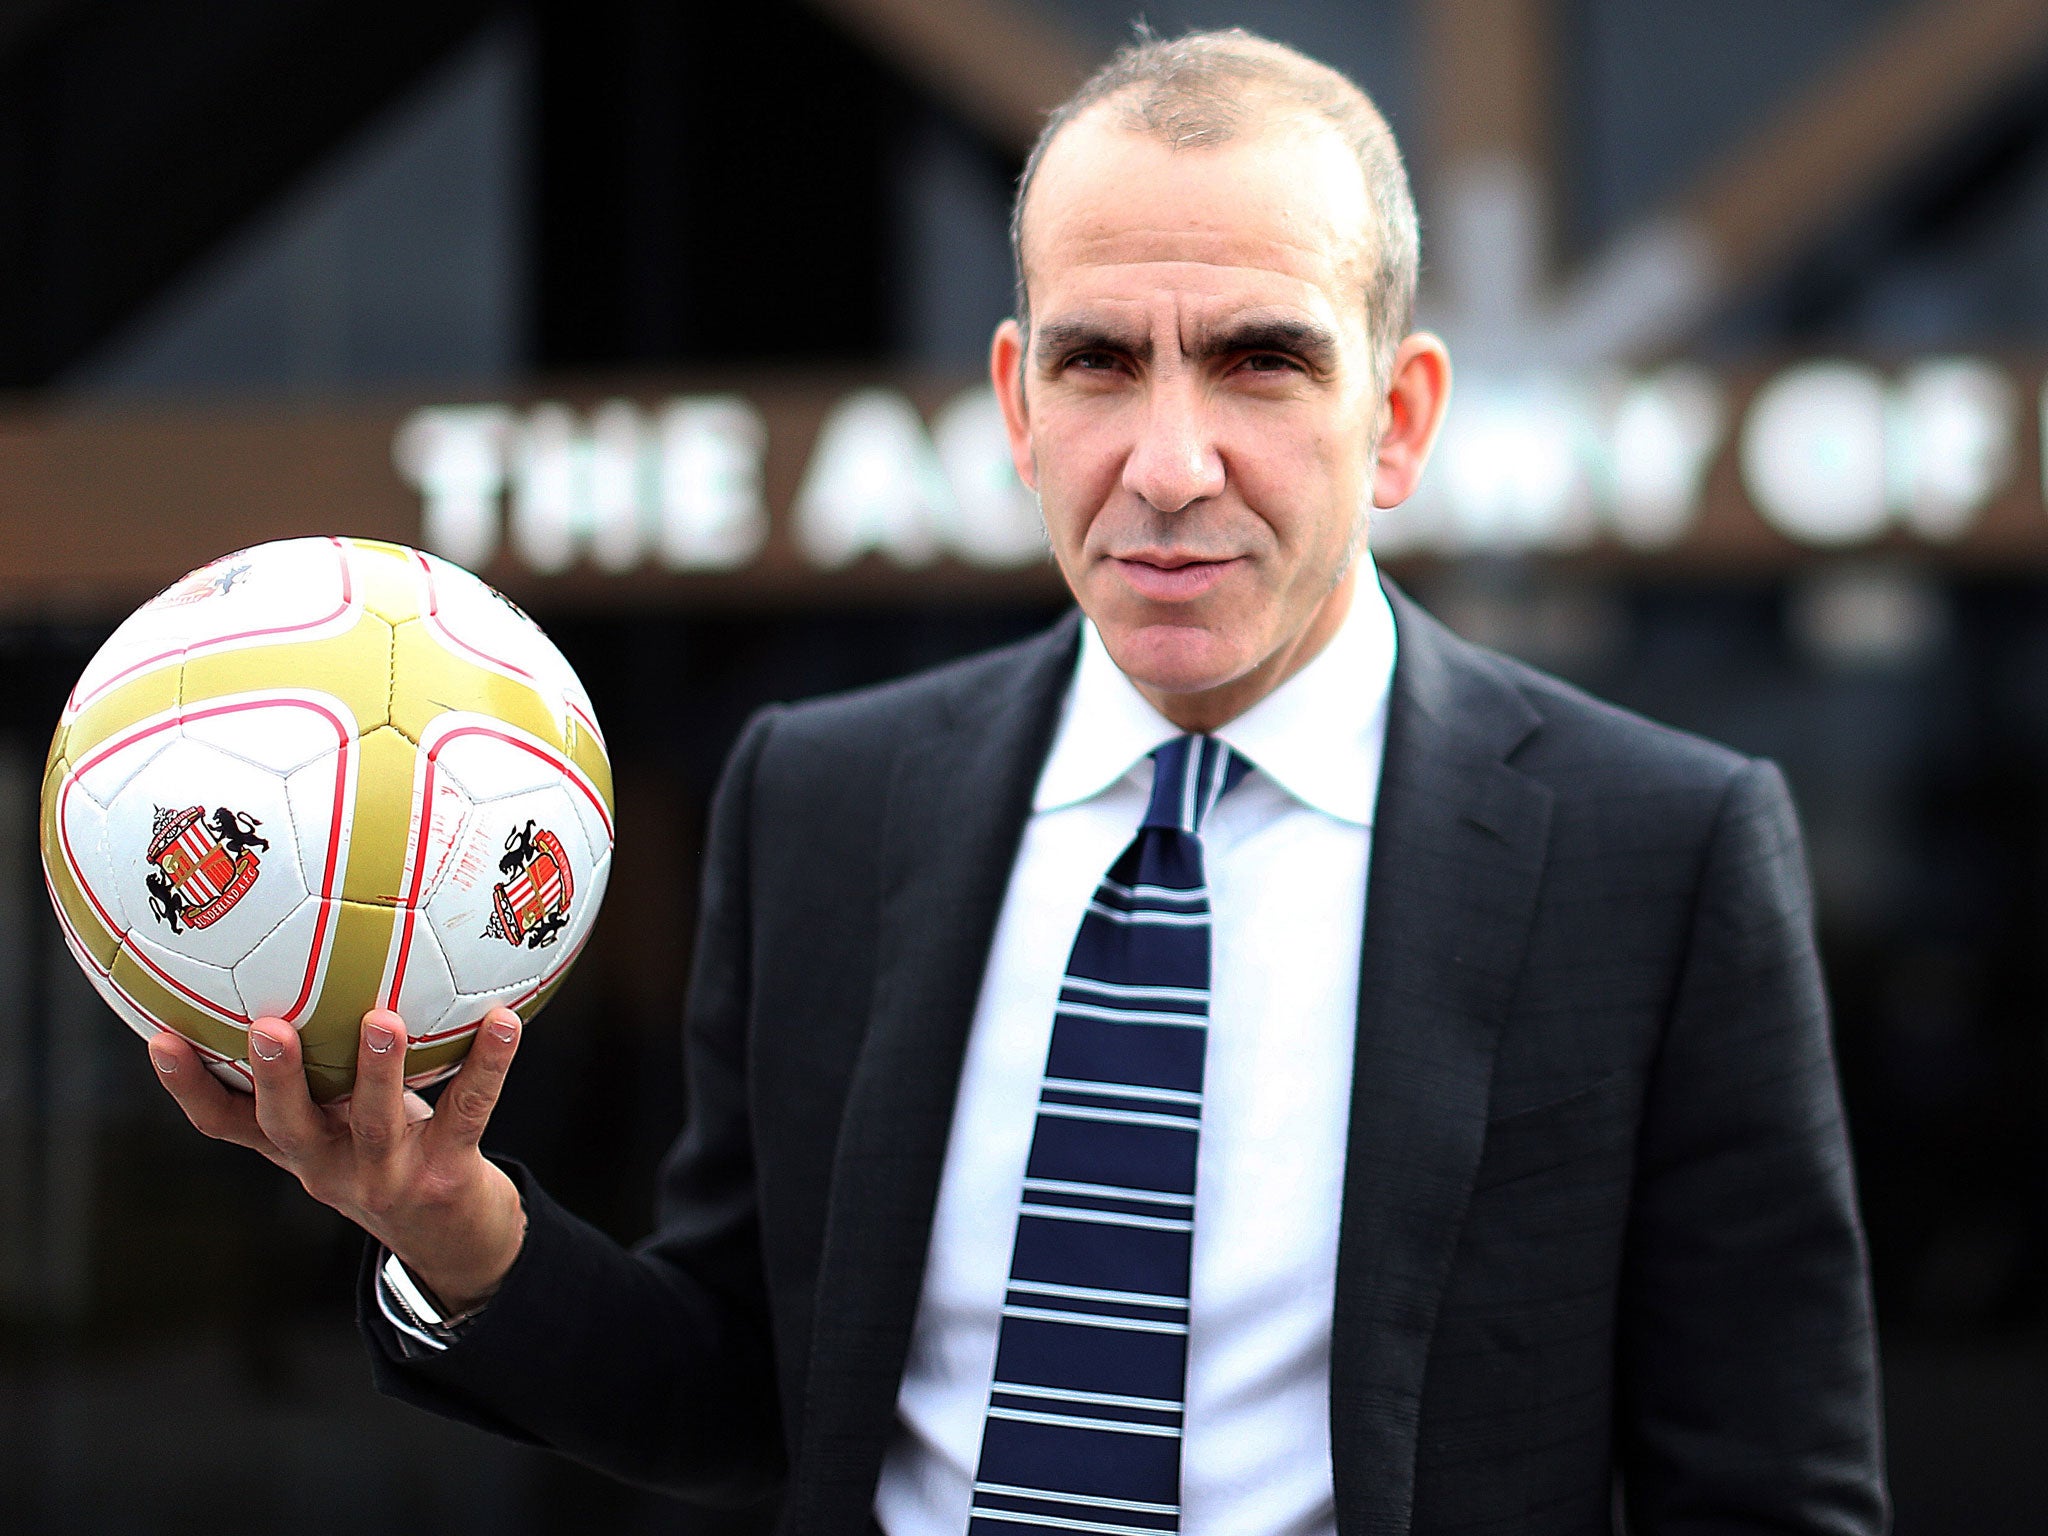 It has been a turbulent first week for Paolo Di Canio